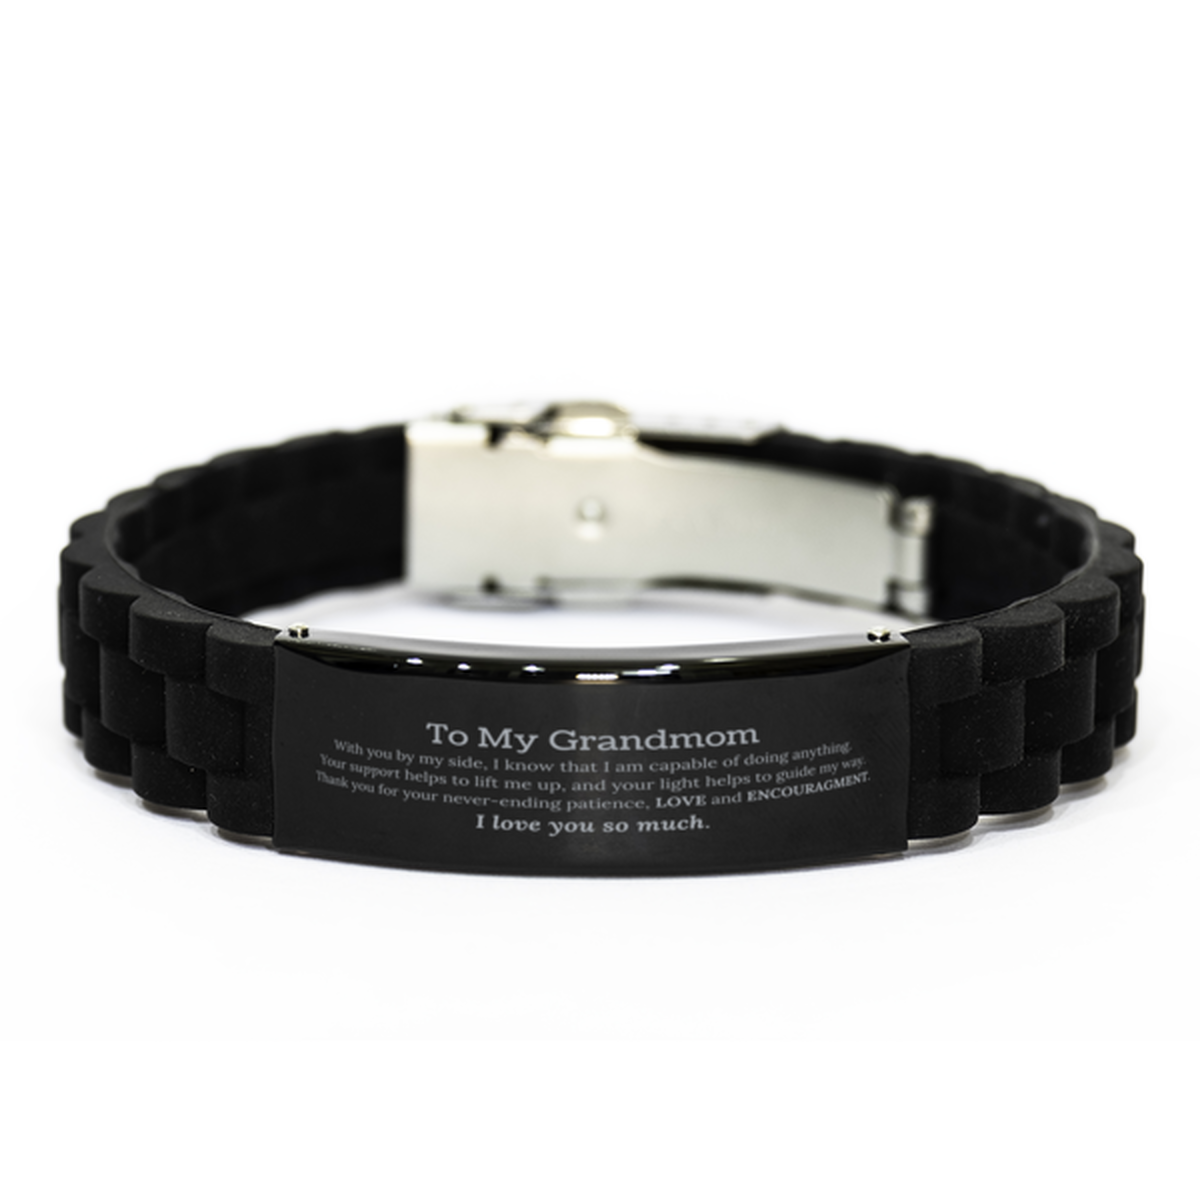 Appreciation Grandmom Black Glidelock Clasp Bracelet Gifts, To My Grandmom Birthday Christmas Wedding Keepsake Gifts for Grandmom With you by my side, I know that I am capable of doing anything. I love you so much